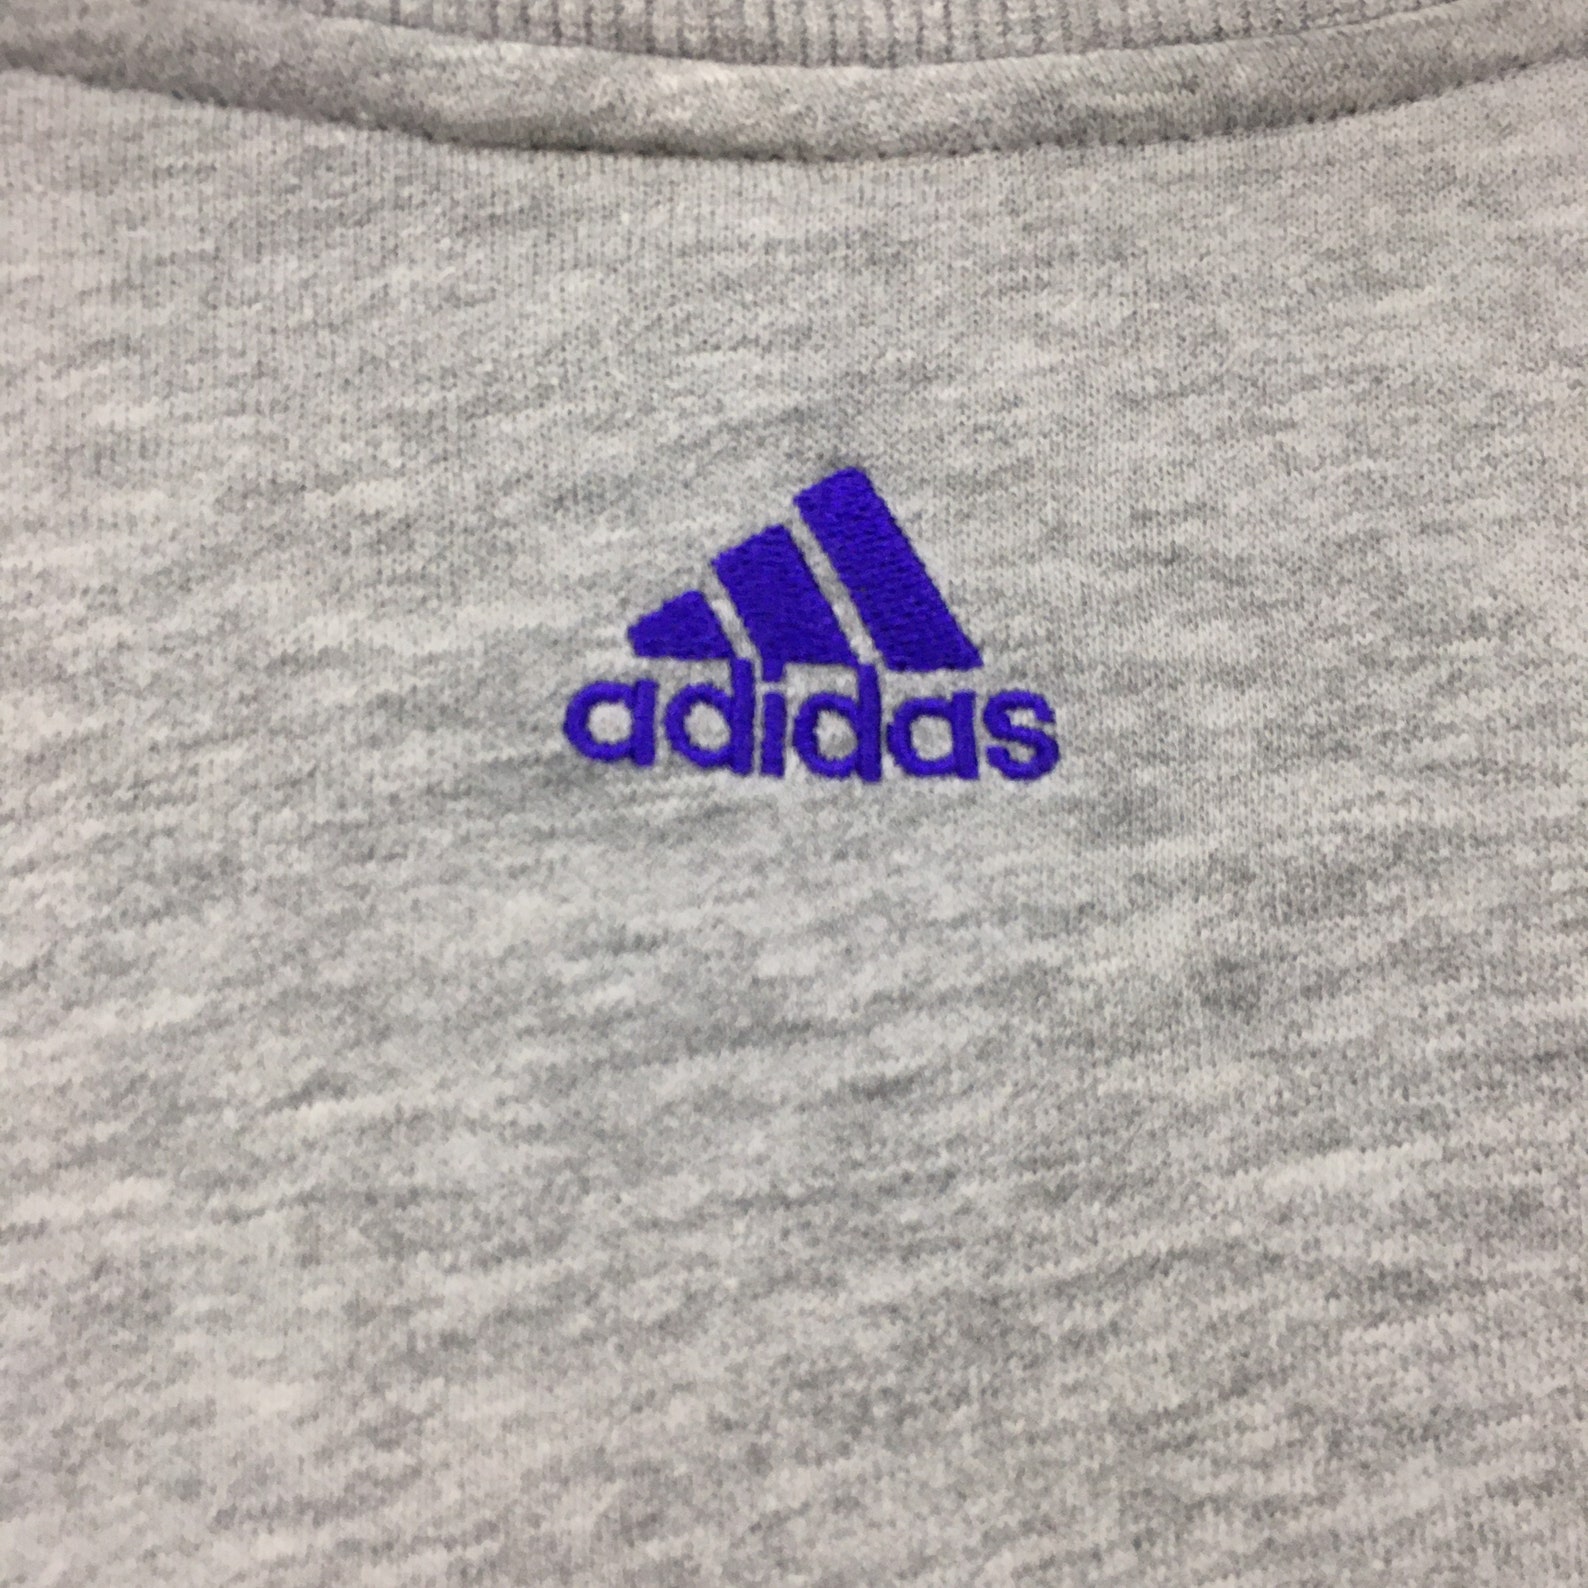 Rare Adidas Flowers Small Logo Embroidery Spellout Crewneck - Etsy